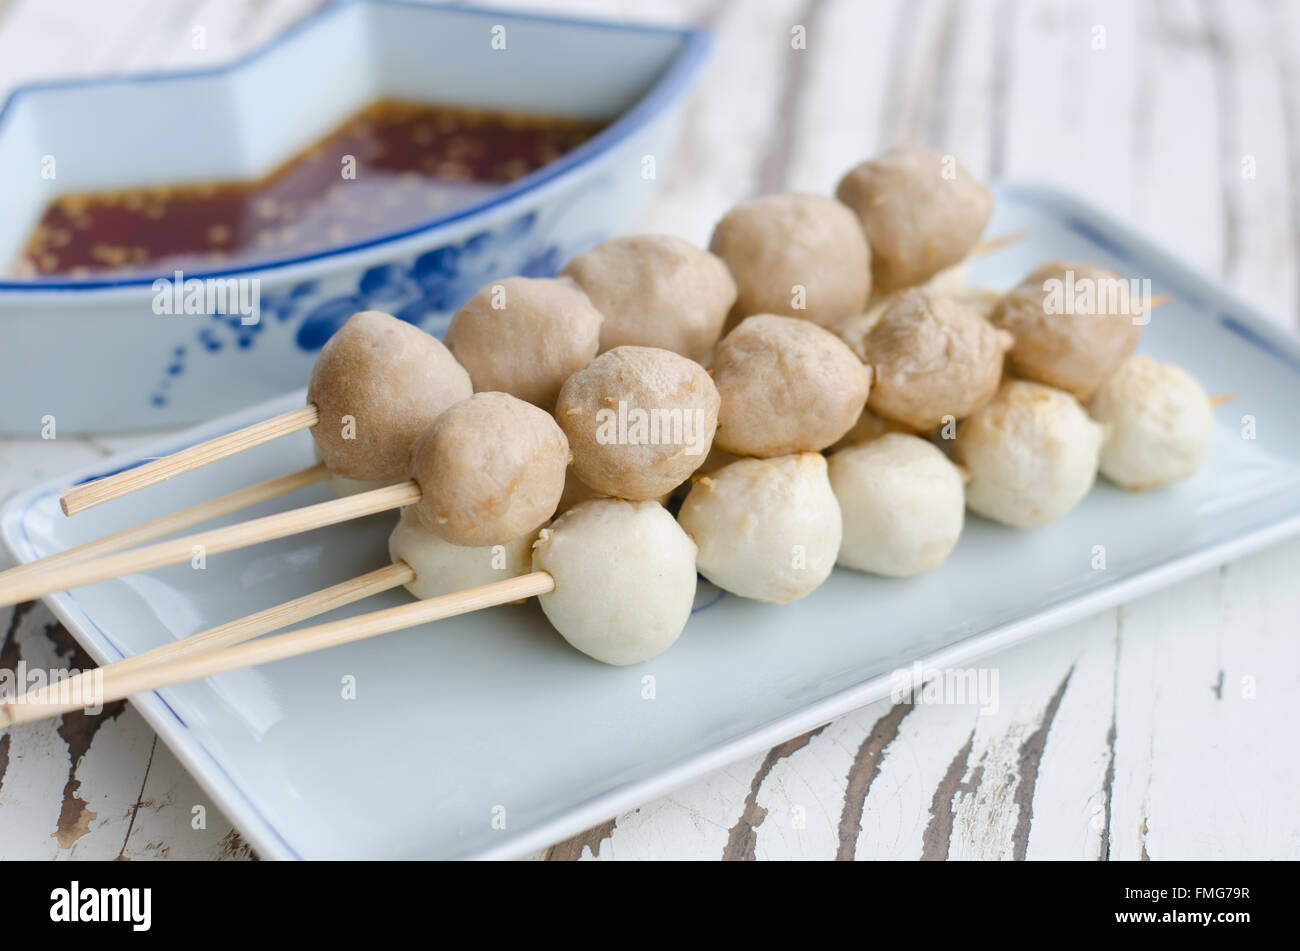 Roasted meat and pork balls with sweet spicy sauce Stock Photo